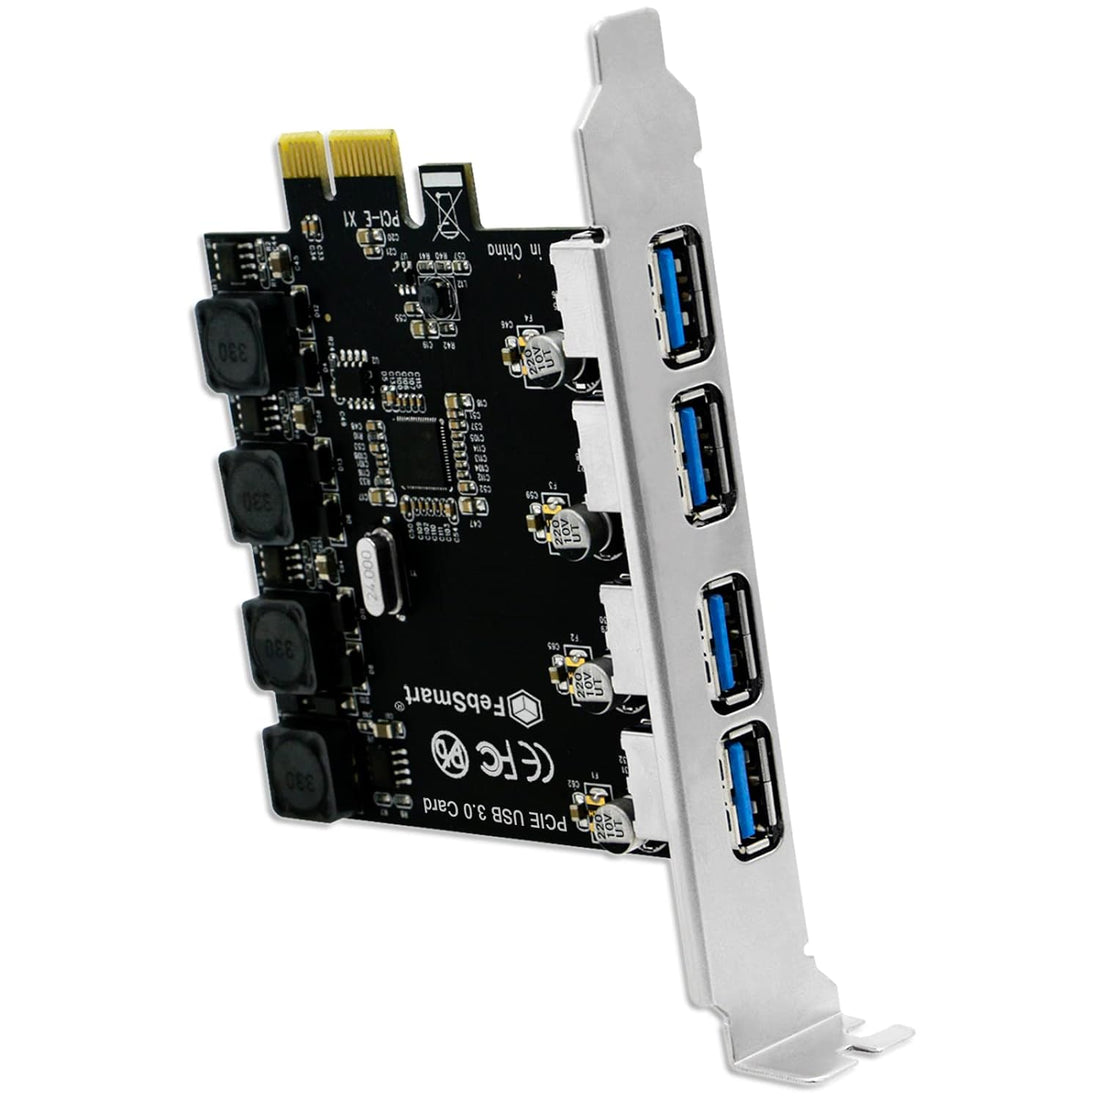 Feb Smart 4 Ports USB 3.0 Super Fast 5Gbps PCI Express(PCIe) Expansion Card for Windows XP